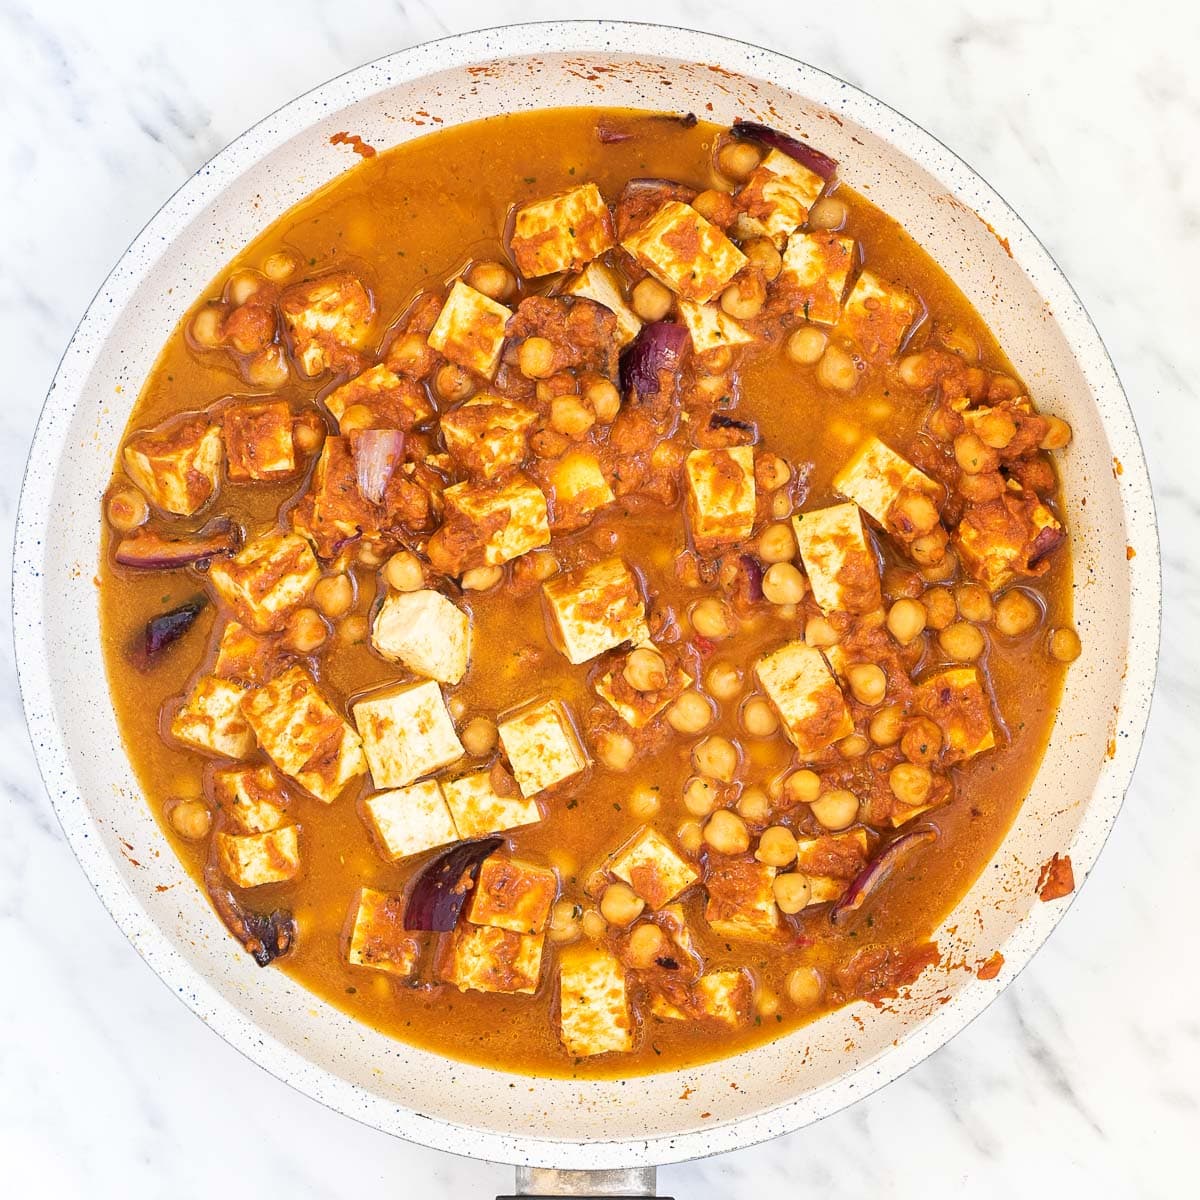 Red onion pieces, tofu cubes, and chickpeas mixed with a thick red orange sauce in a white frying pan.